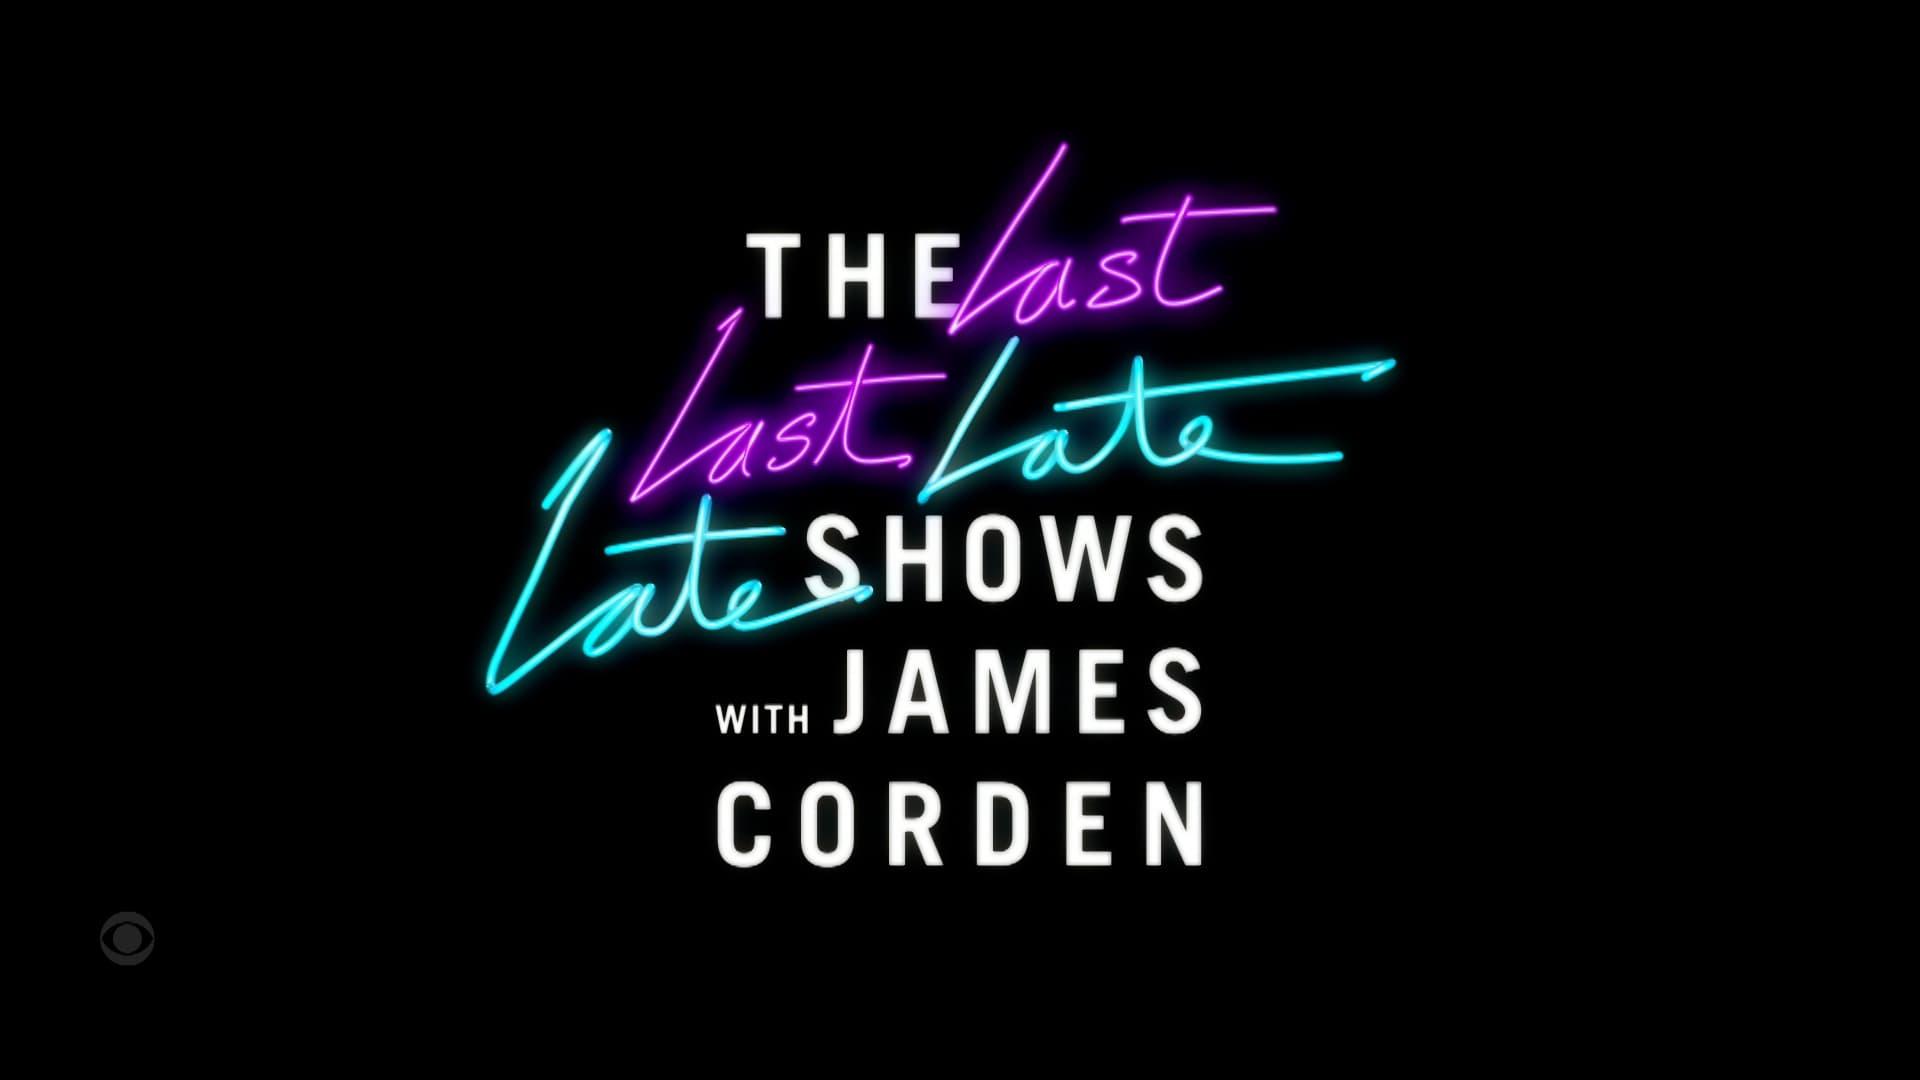 The Last Last Late Late Show backdrop